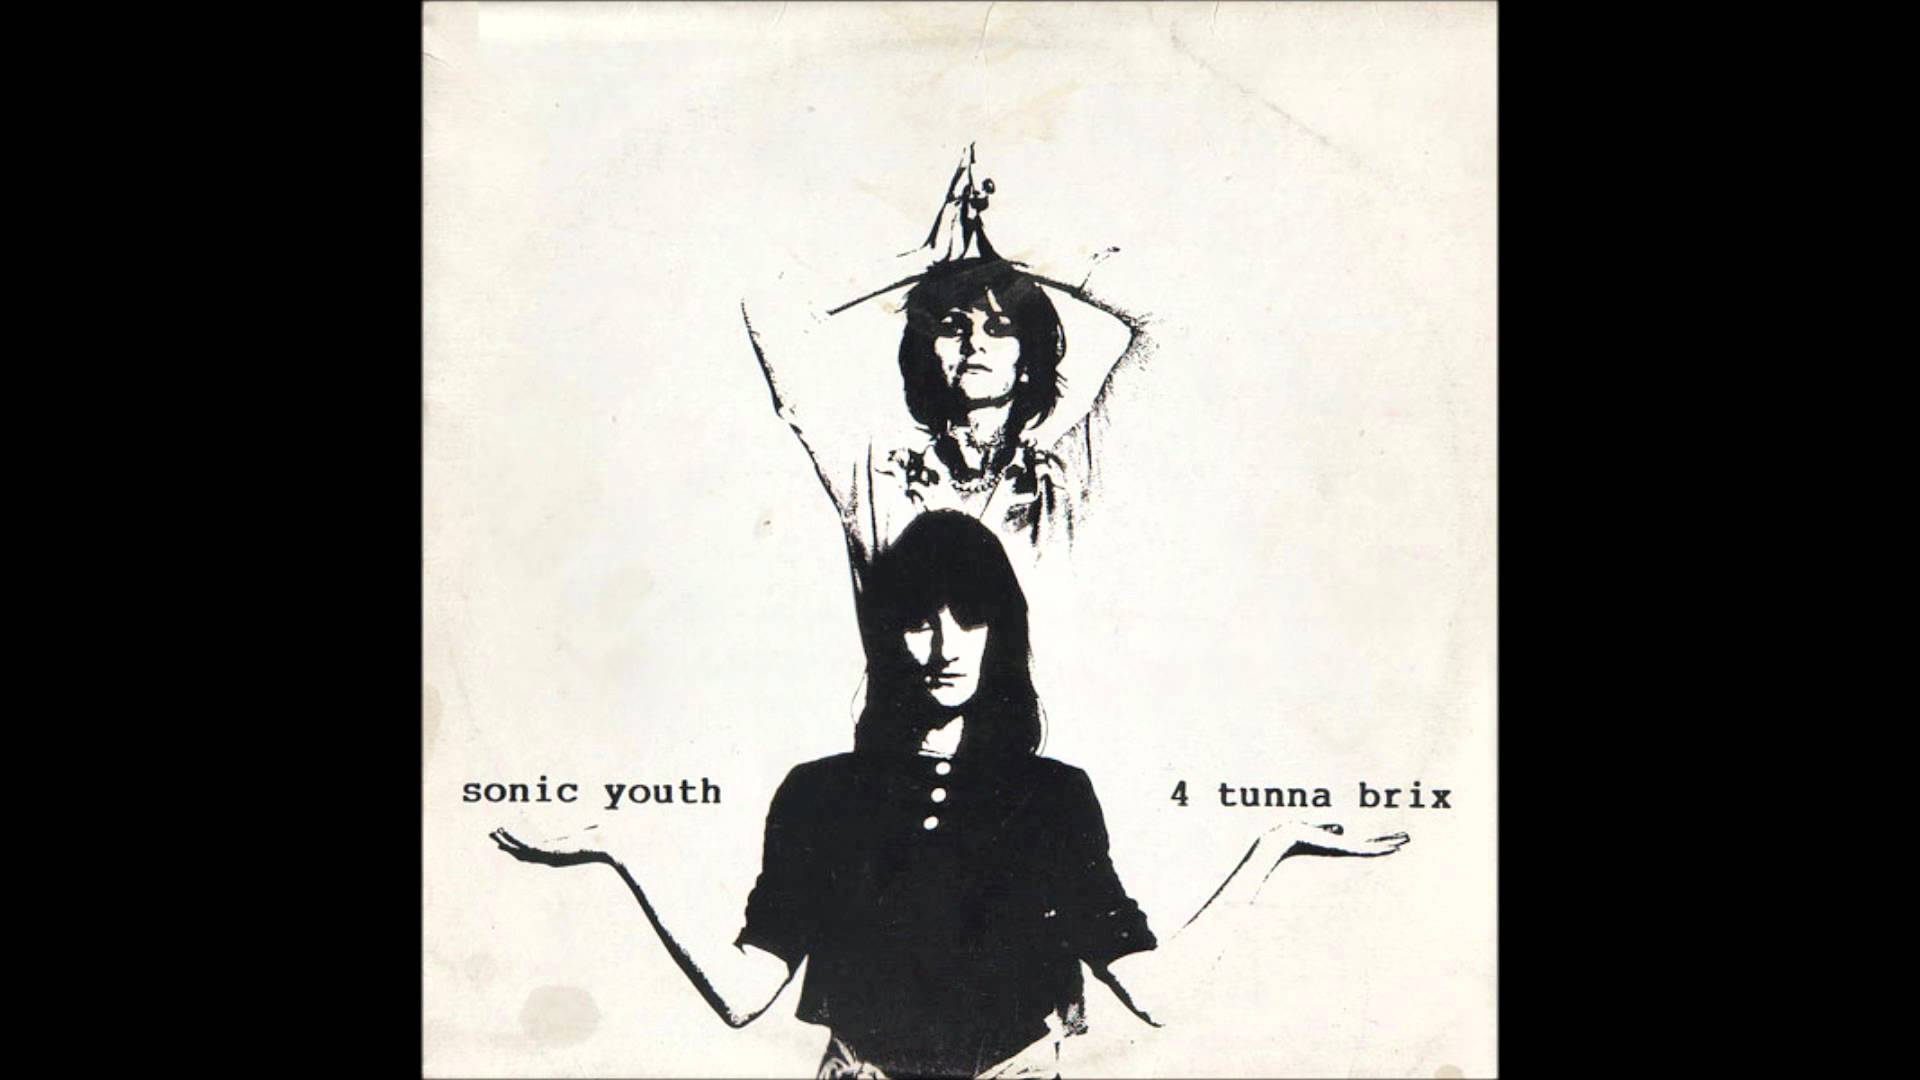 Sonic Youth - B3.Victoria - YouTube